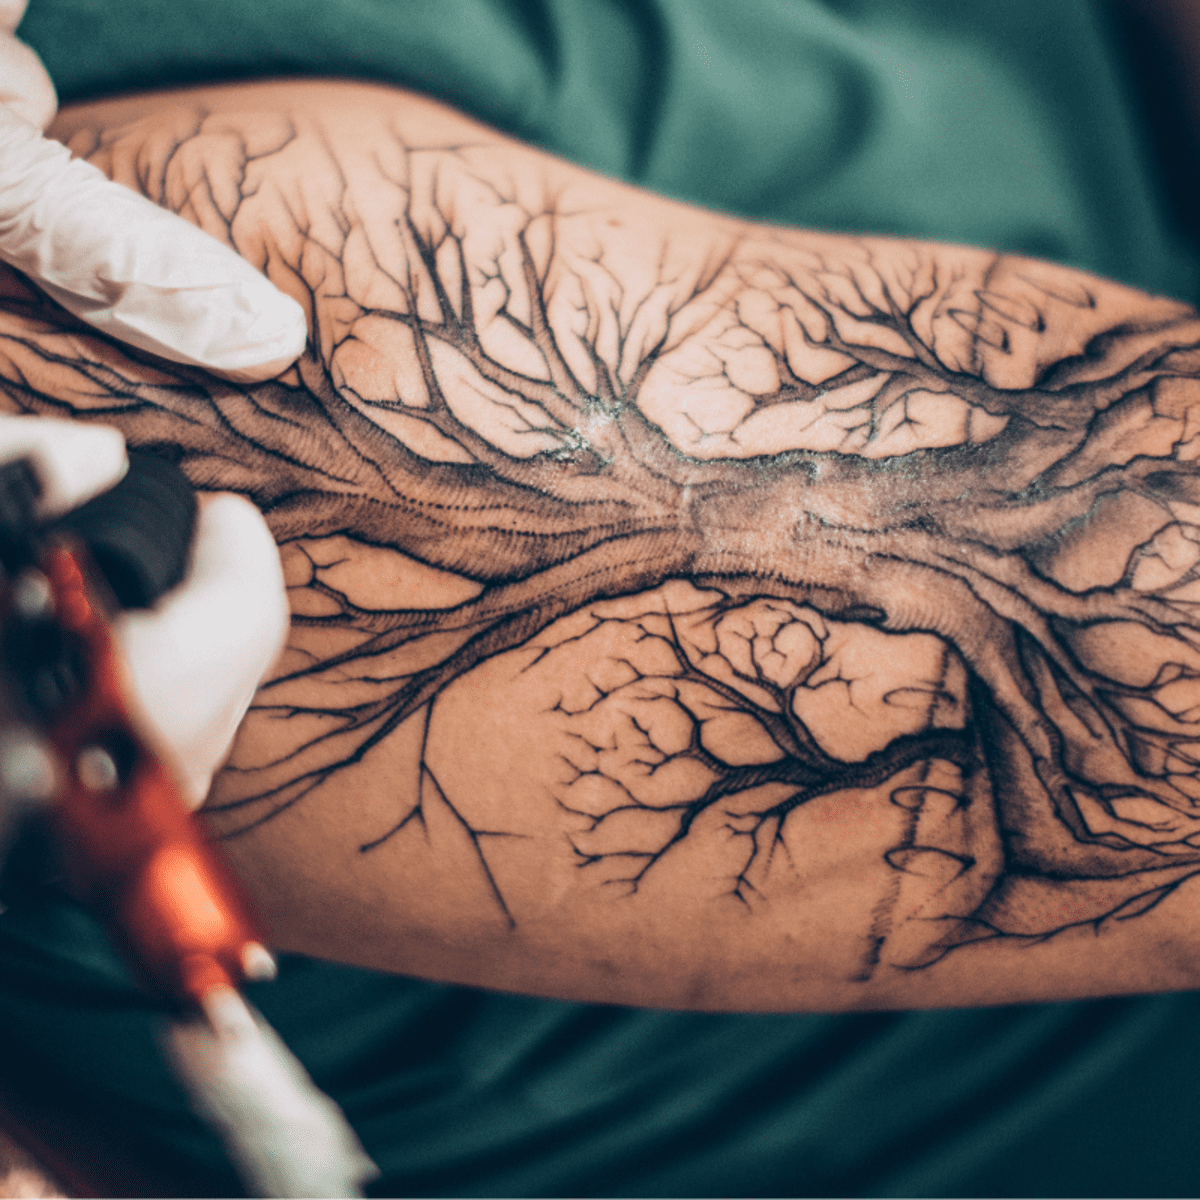 Flying Birds And Moon With Forest Tree Tattoo On Shoulder